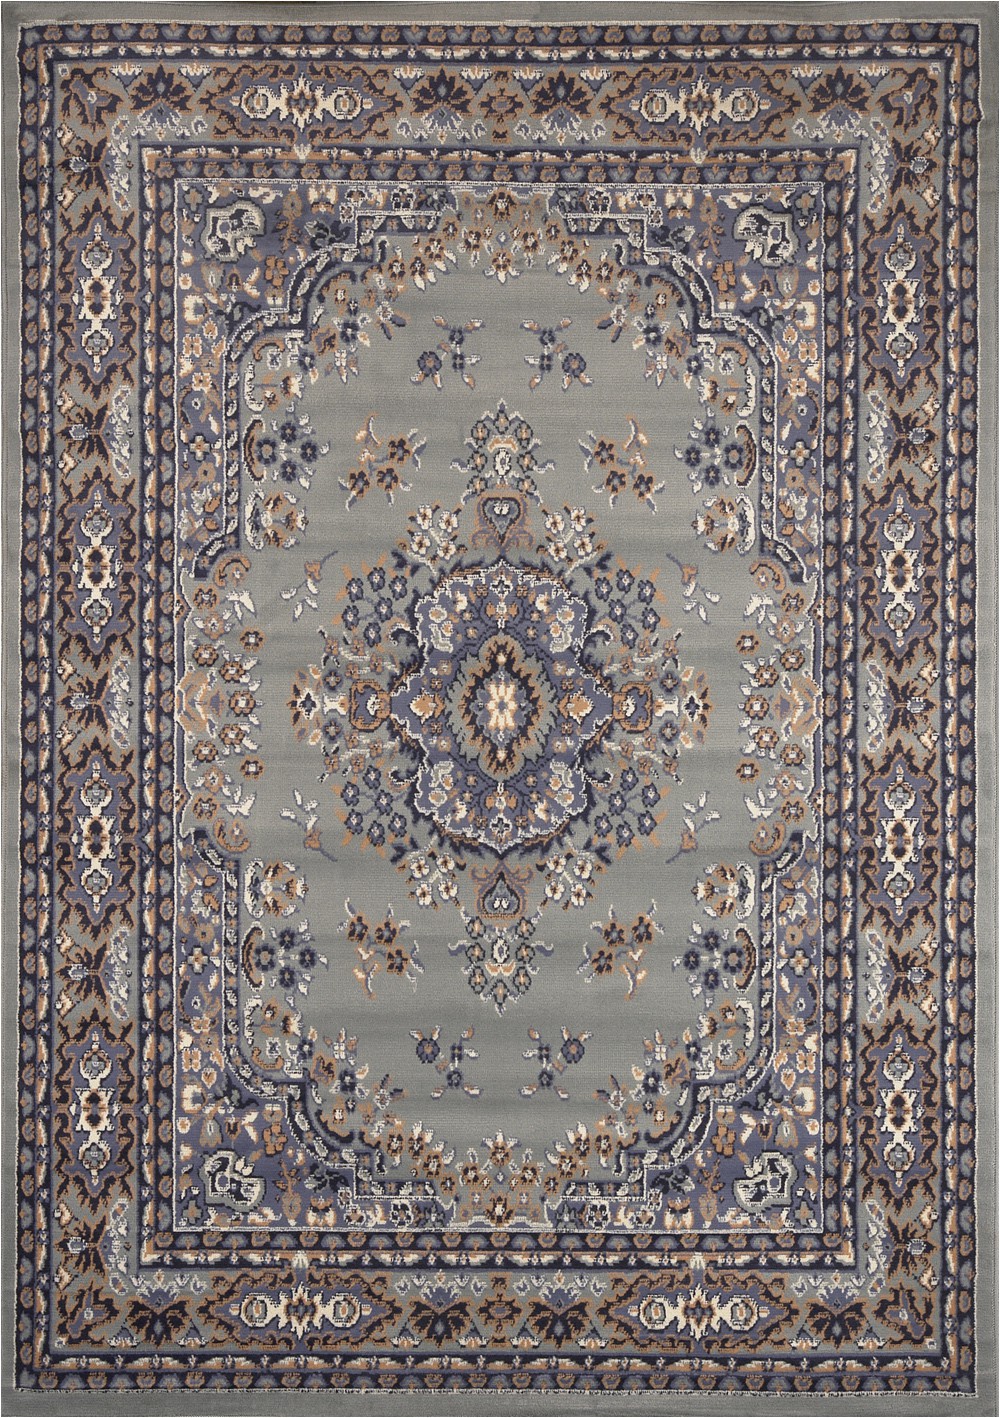 Area Rugs for Sale On Ebay Details About Traditional Medallion Persien Style 8×11 area Rug Actual 7 8" X 10 8"